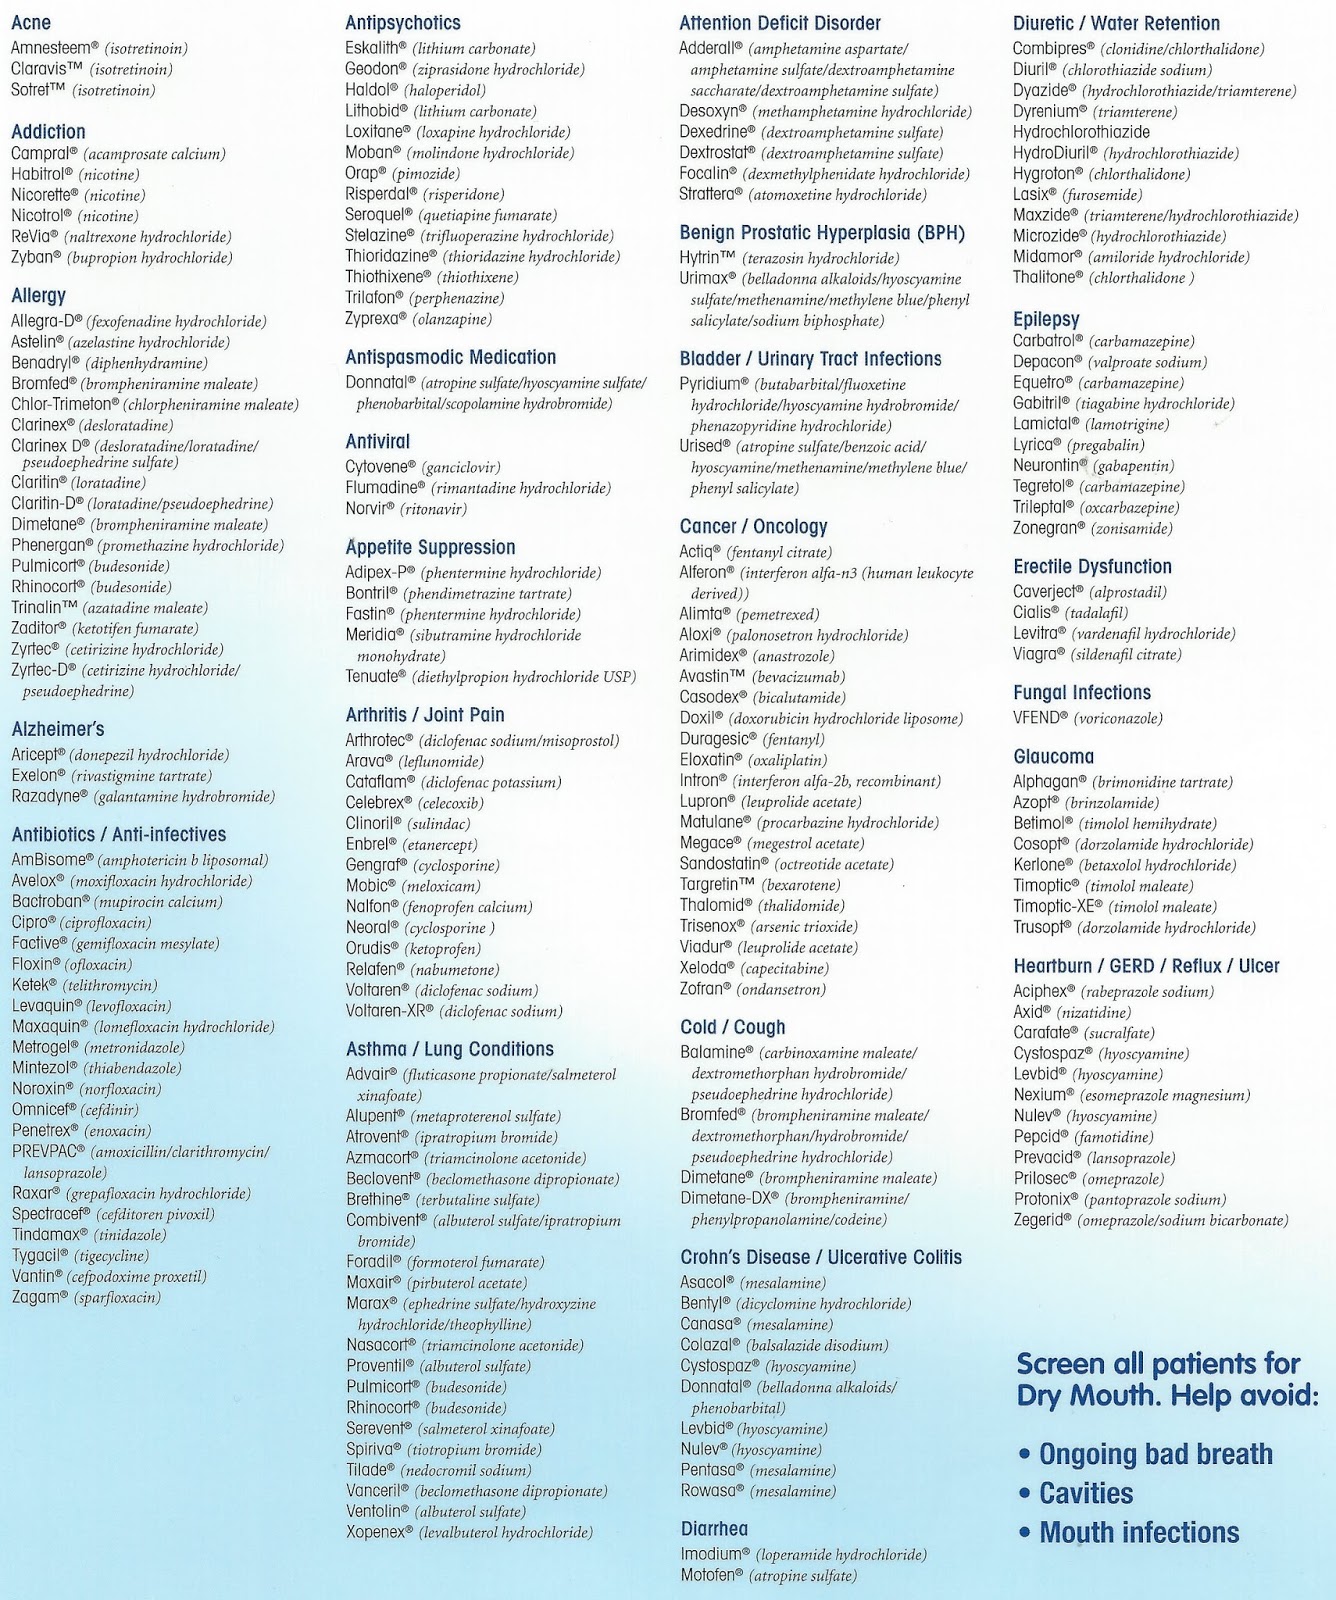 Medications that cause dry mouth - List of medications